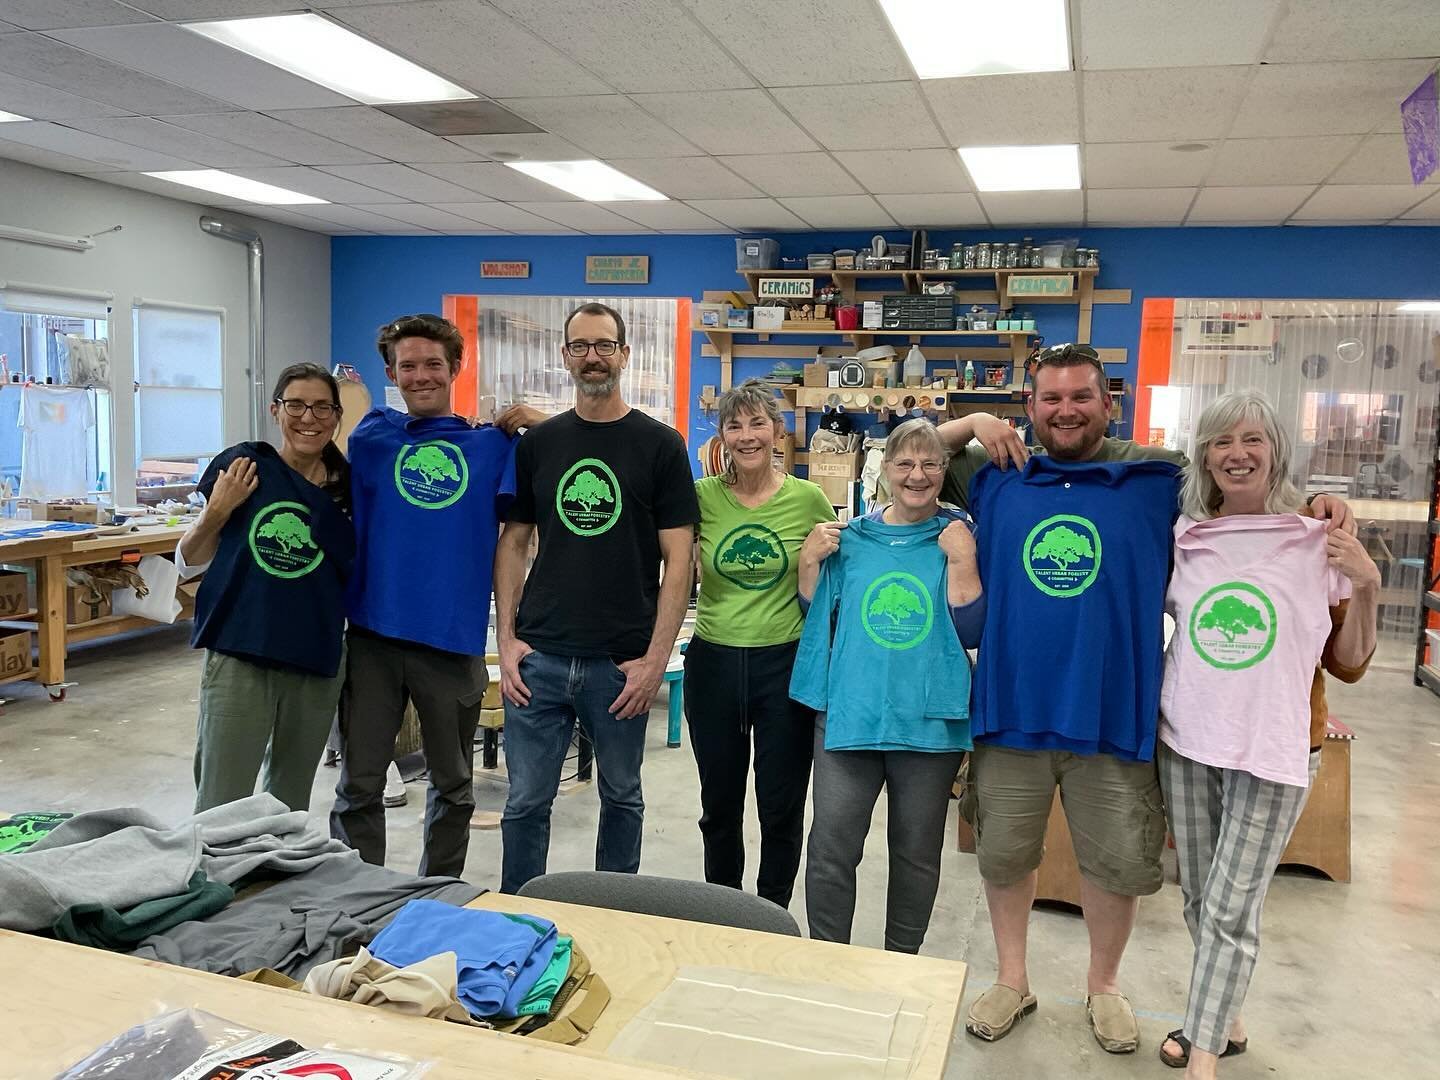 [Espa&ntilde;ol abajo] 
We loved having the Talent Urban Forestry Committee (TUFC) in the shop printing tee shirts and patches with their logo. They filled the shop with talk of trees and horticulture. The TUFC plans tree planting events and helps fo